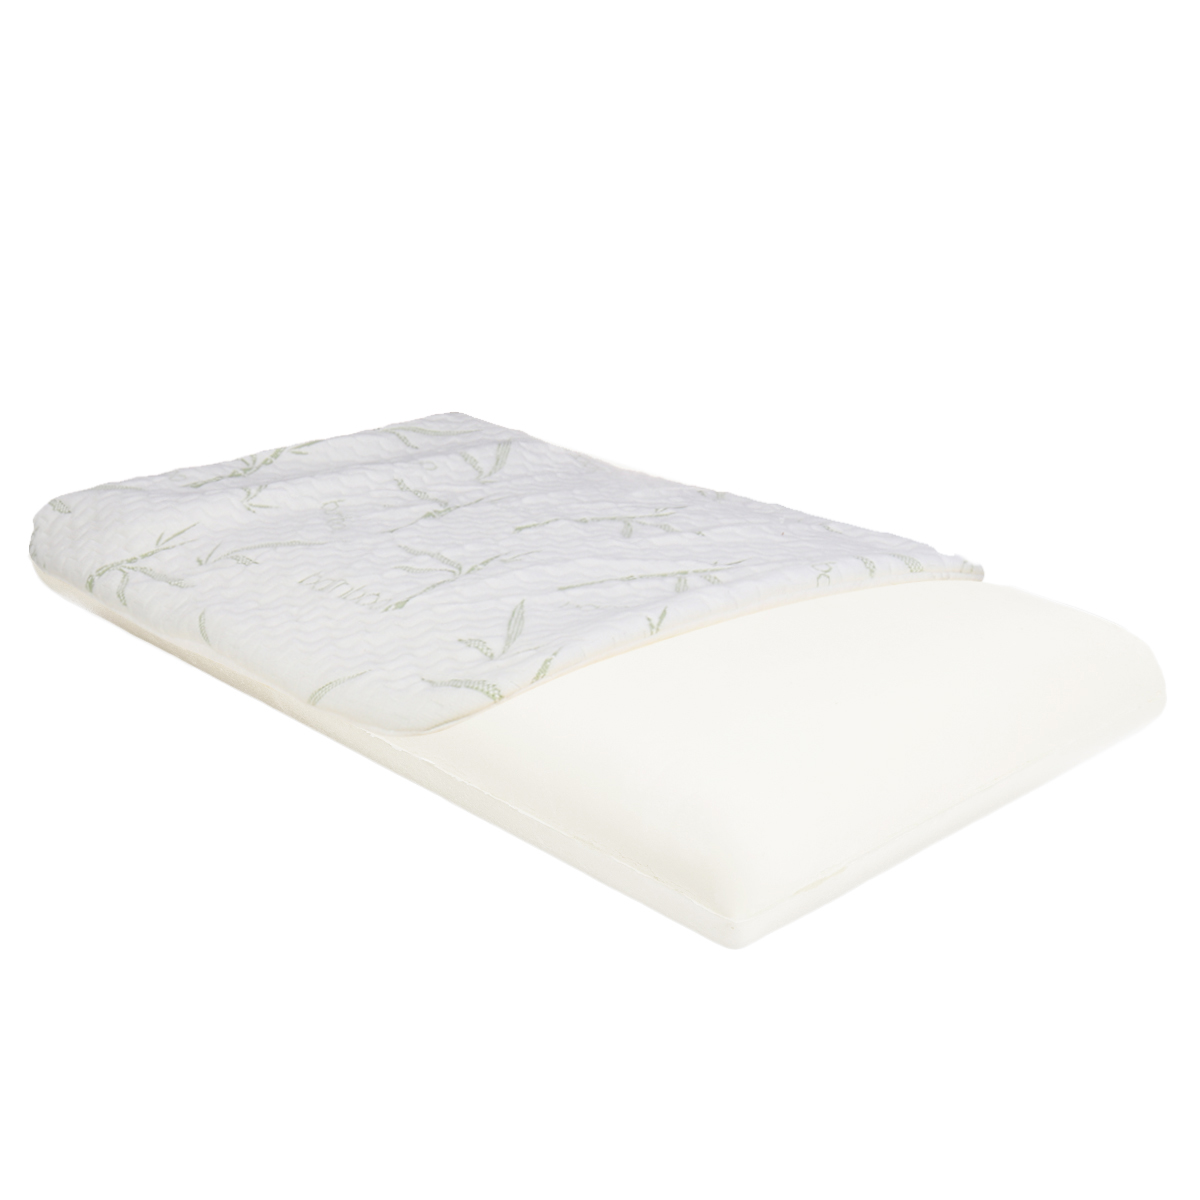 Bamboo-Memory-Foam-Pillow-Reversible-Pillow-Orthopedic-Slow-Rebound-Cervical-Neck-Pain-Relief-1813962-9